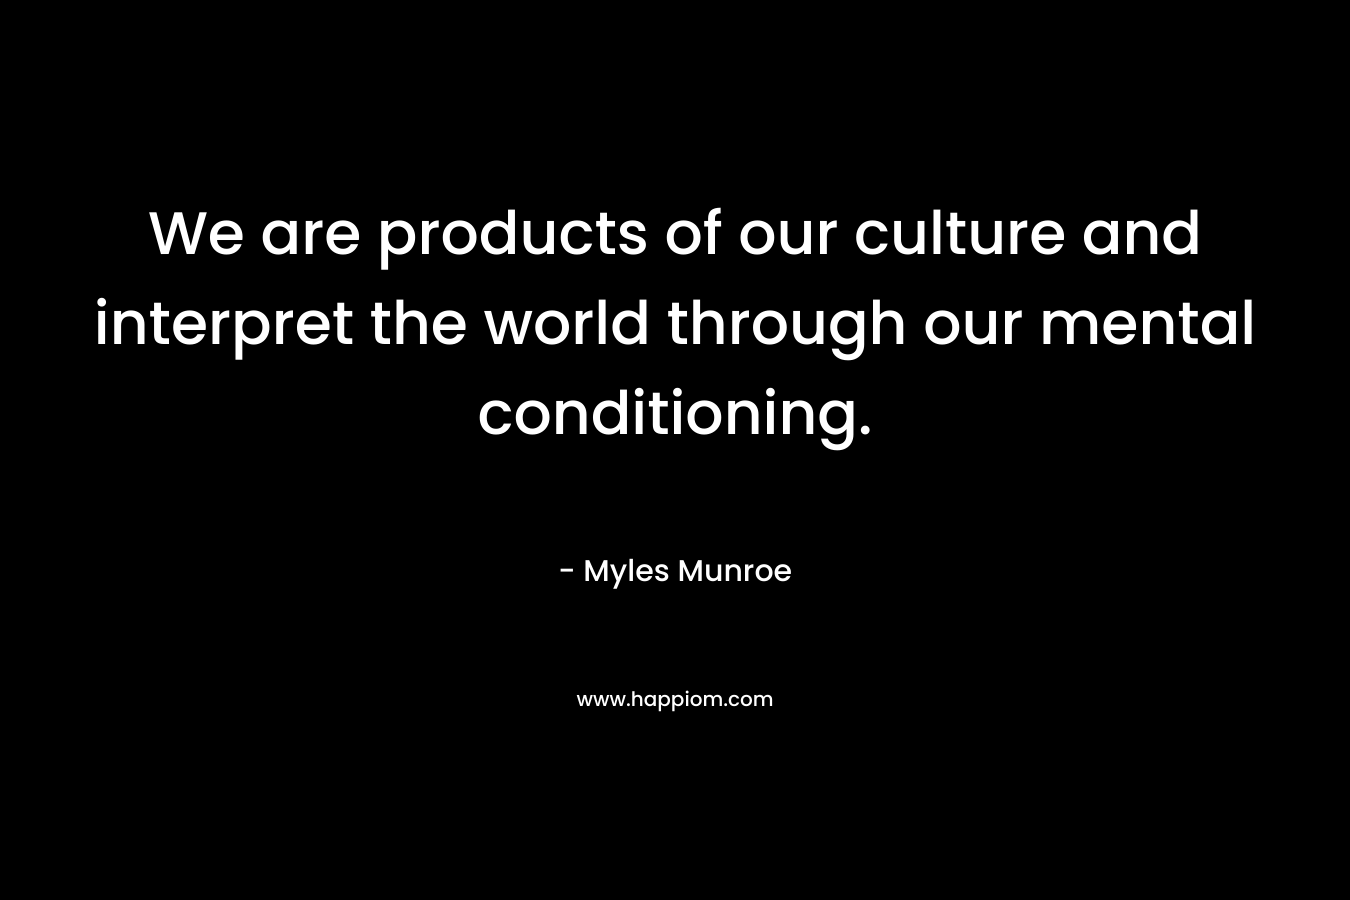 We are products of our culture and interpret the world through our mental conditioning.